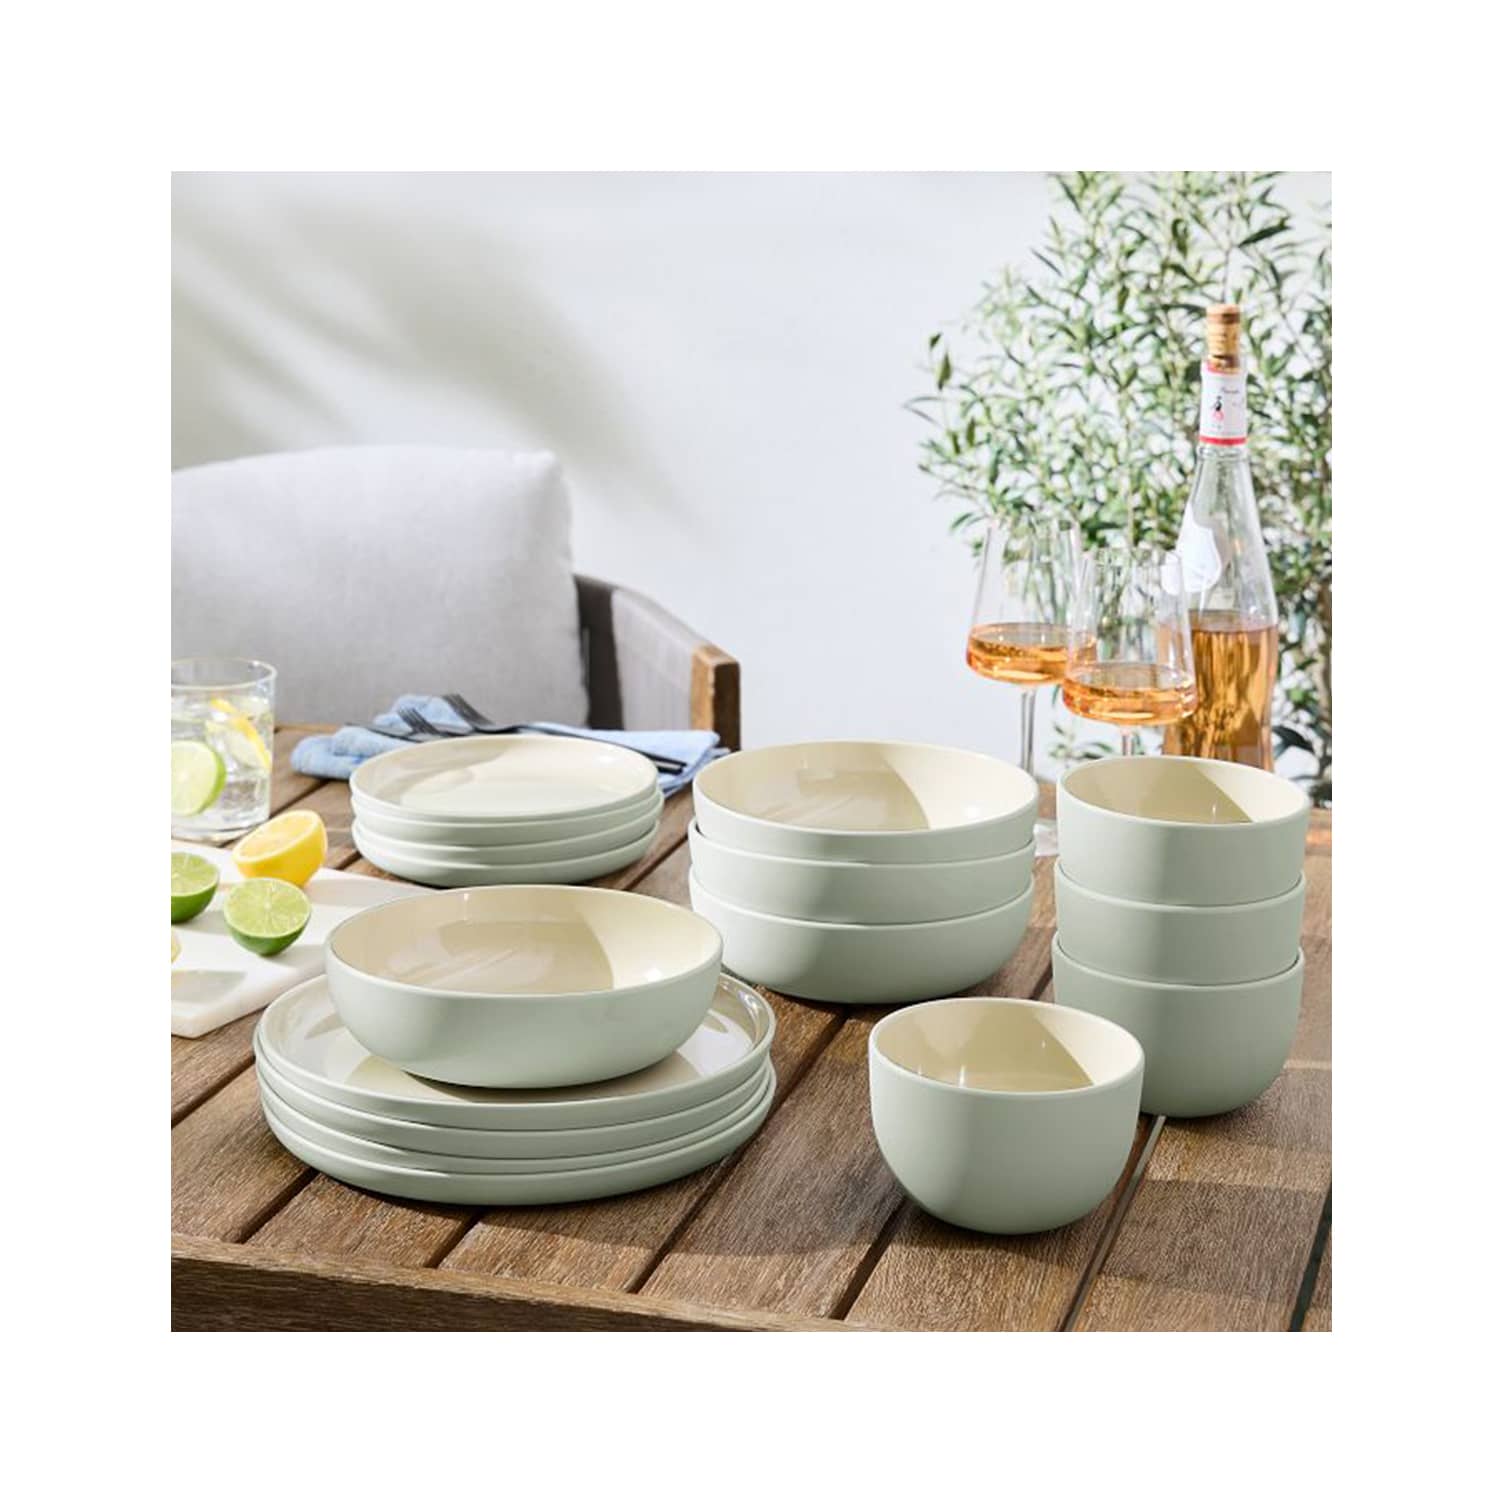 https://cdn.apartmenttherapy.info/image/upload/v1684604119/at/product%20listing/west-elm-kaloh-melamine-outdoor-dinnerware-collection.jpg